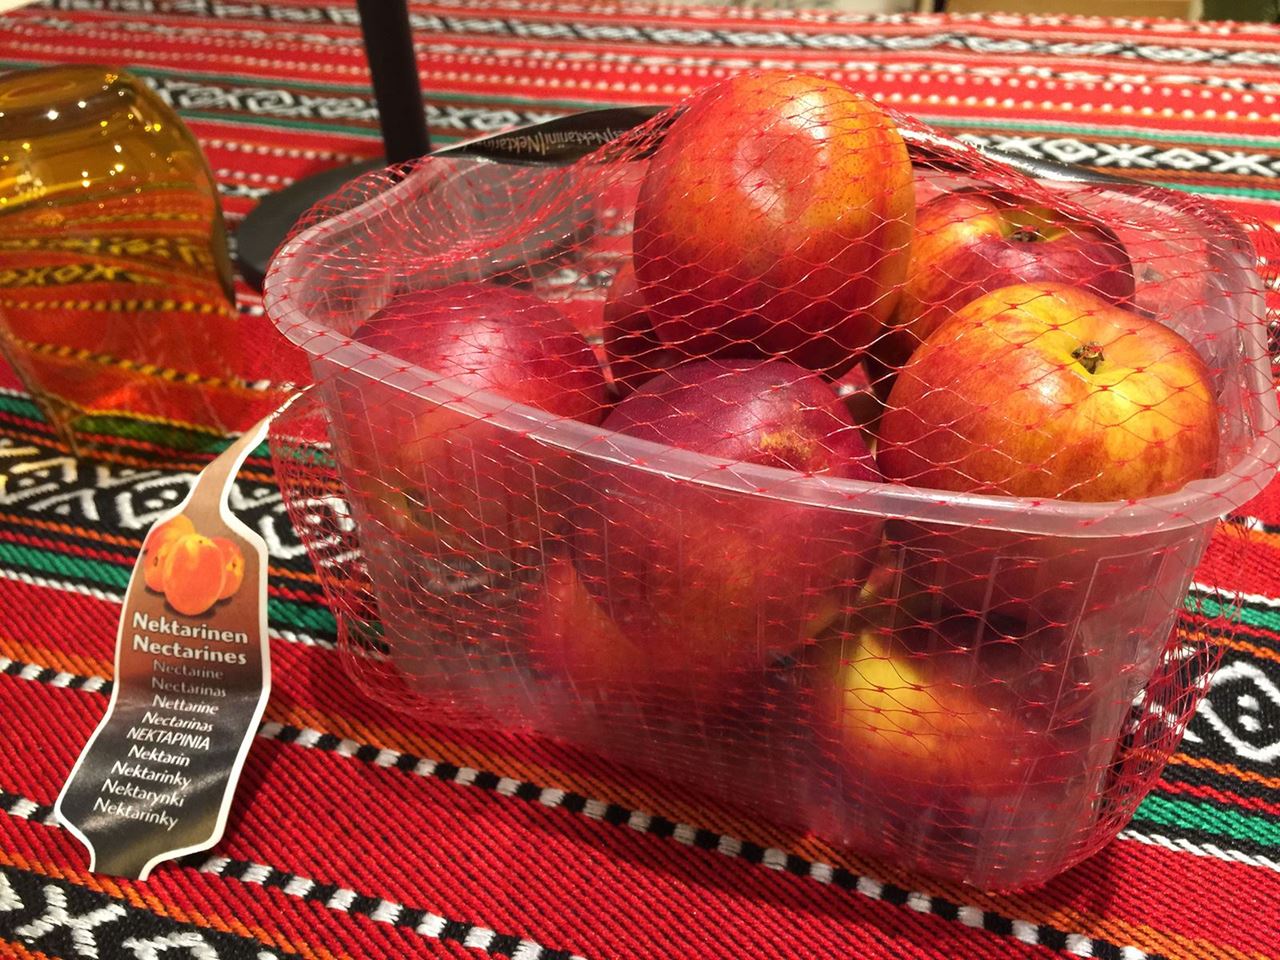 "PEACH GARDEN" Promotes Fresh Peaches in Kuwait for the 2nd consecutive Year